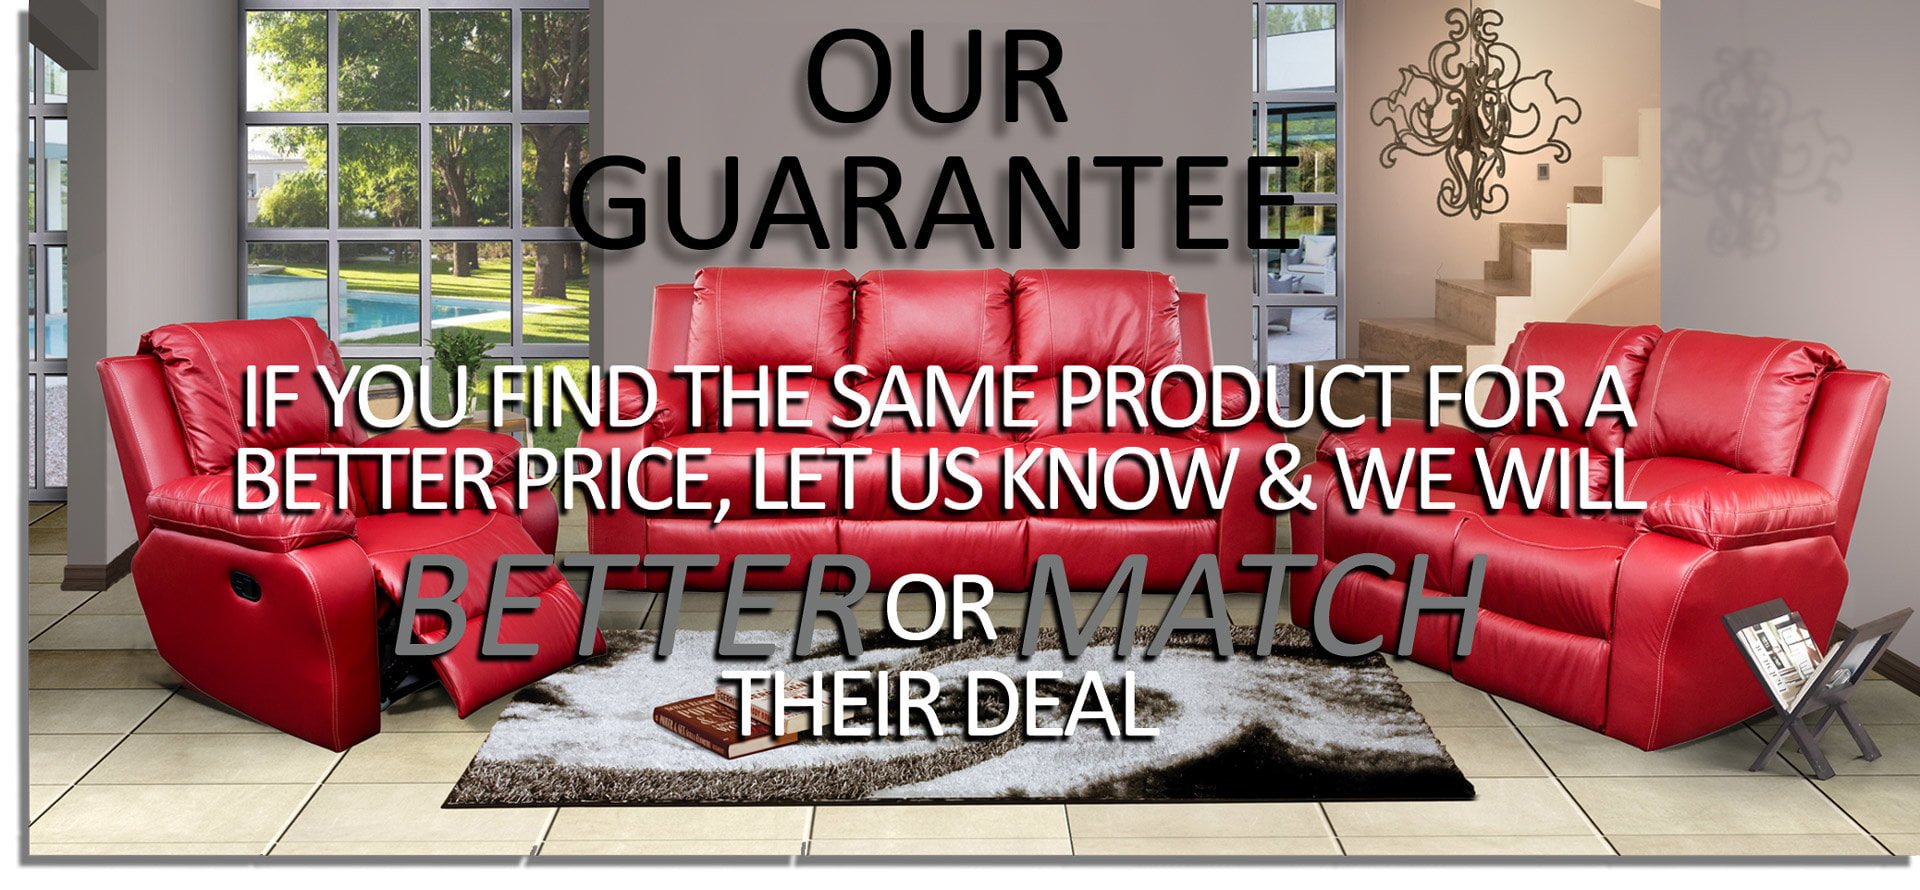 Lowest prices GUARANTEED